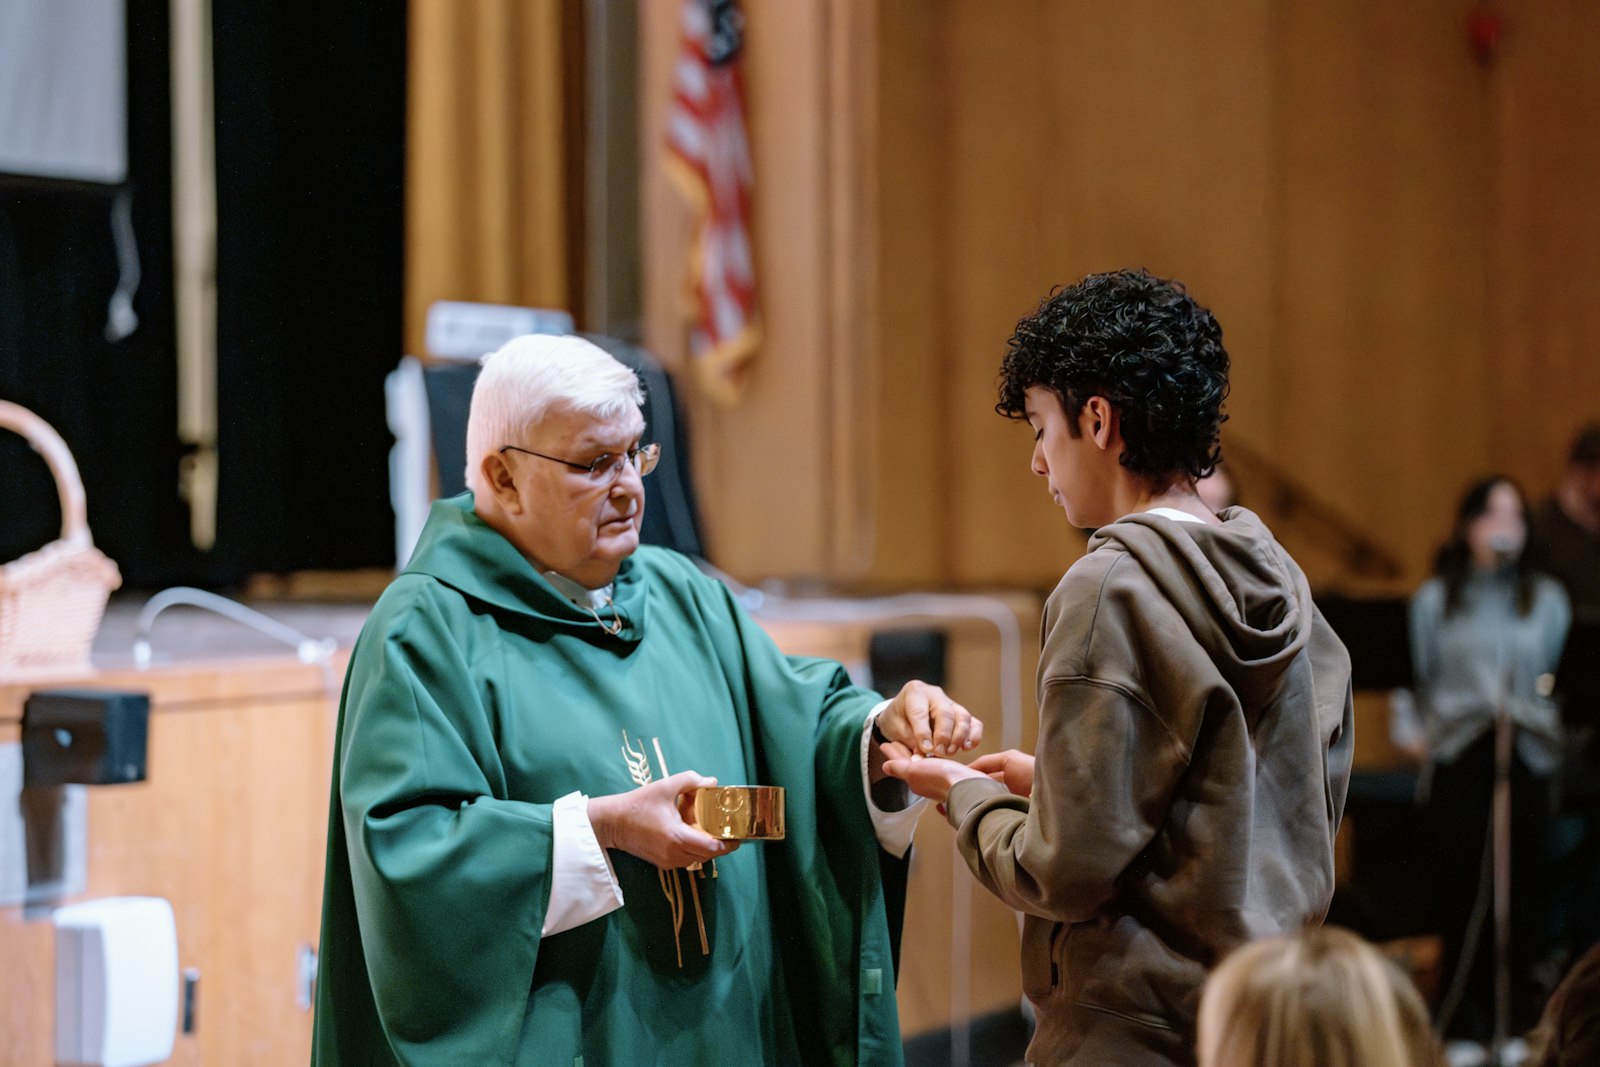 Bishop Quinn relayed a story about his great-nephew, using a metaphor about going "up the down escalator" to encourage teens to be a light in their communities, even if those communities aren't following Christ. (Alissa Tuttle | Special to Detroit Catholic)